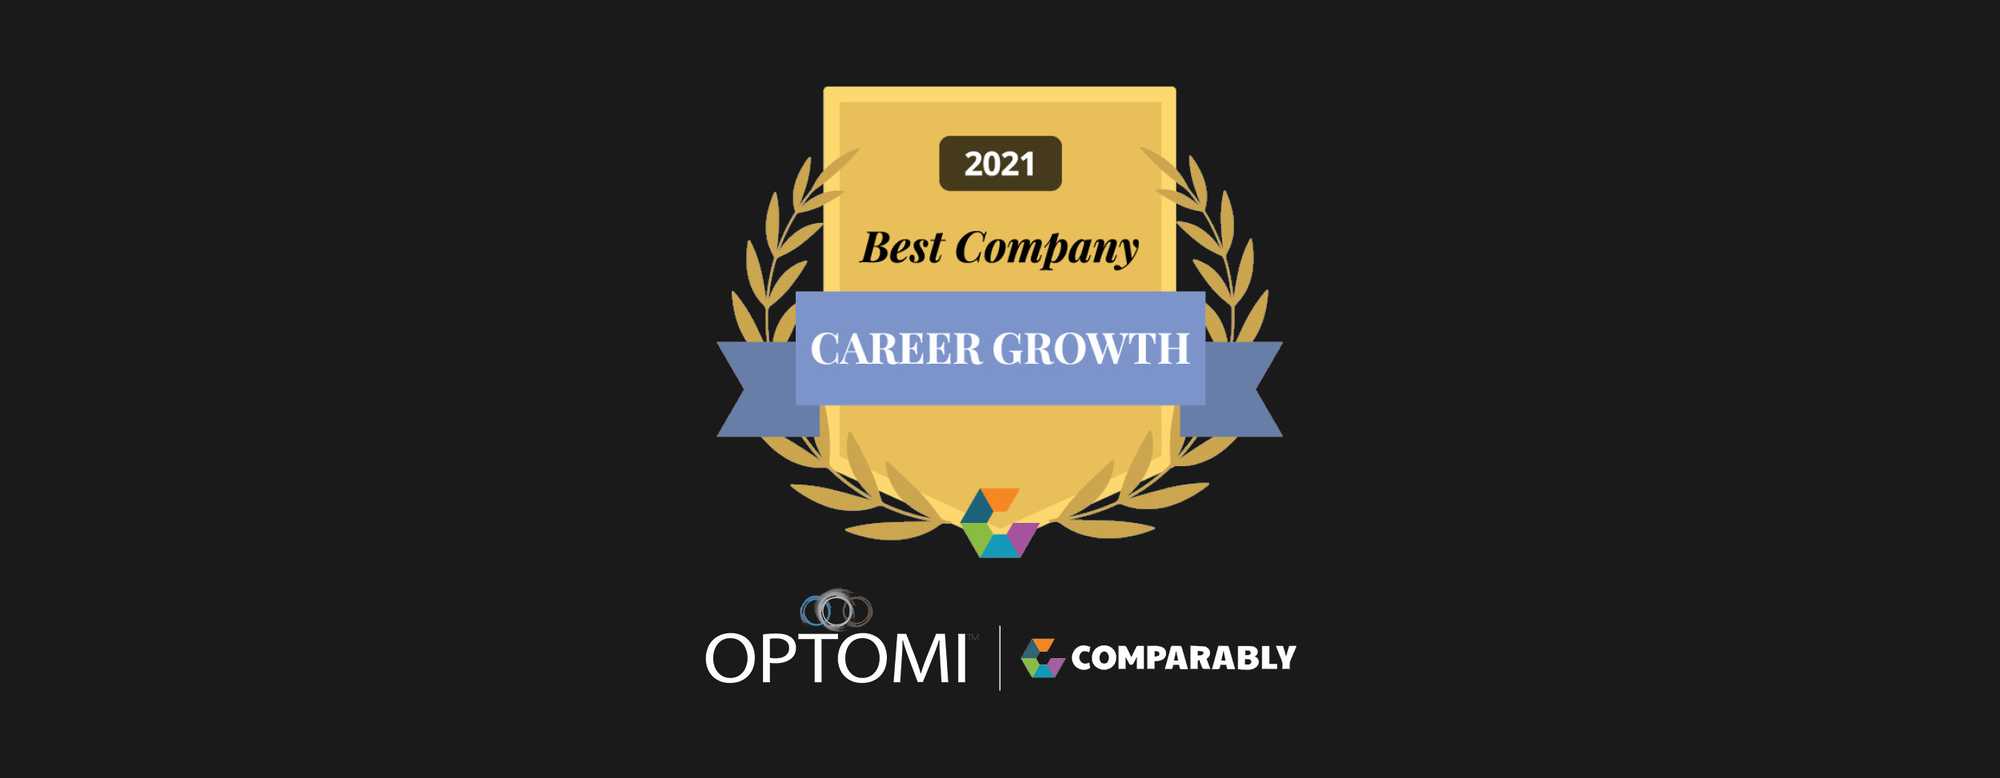 Optomi Ranked #4 in Best Opportunity for Career Growth